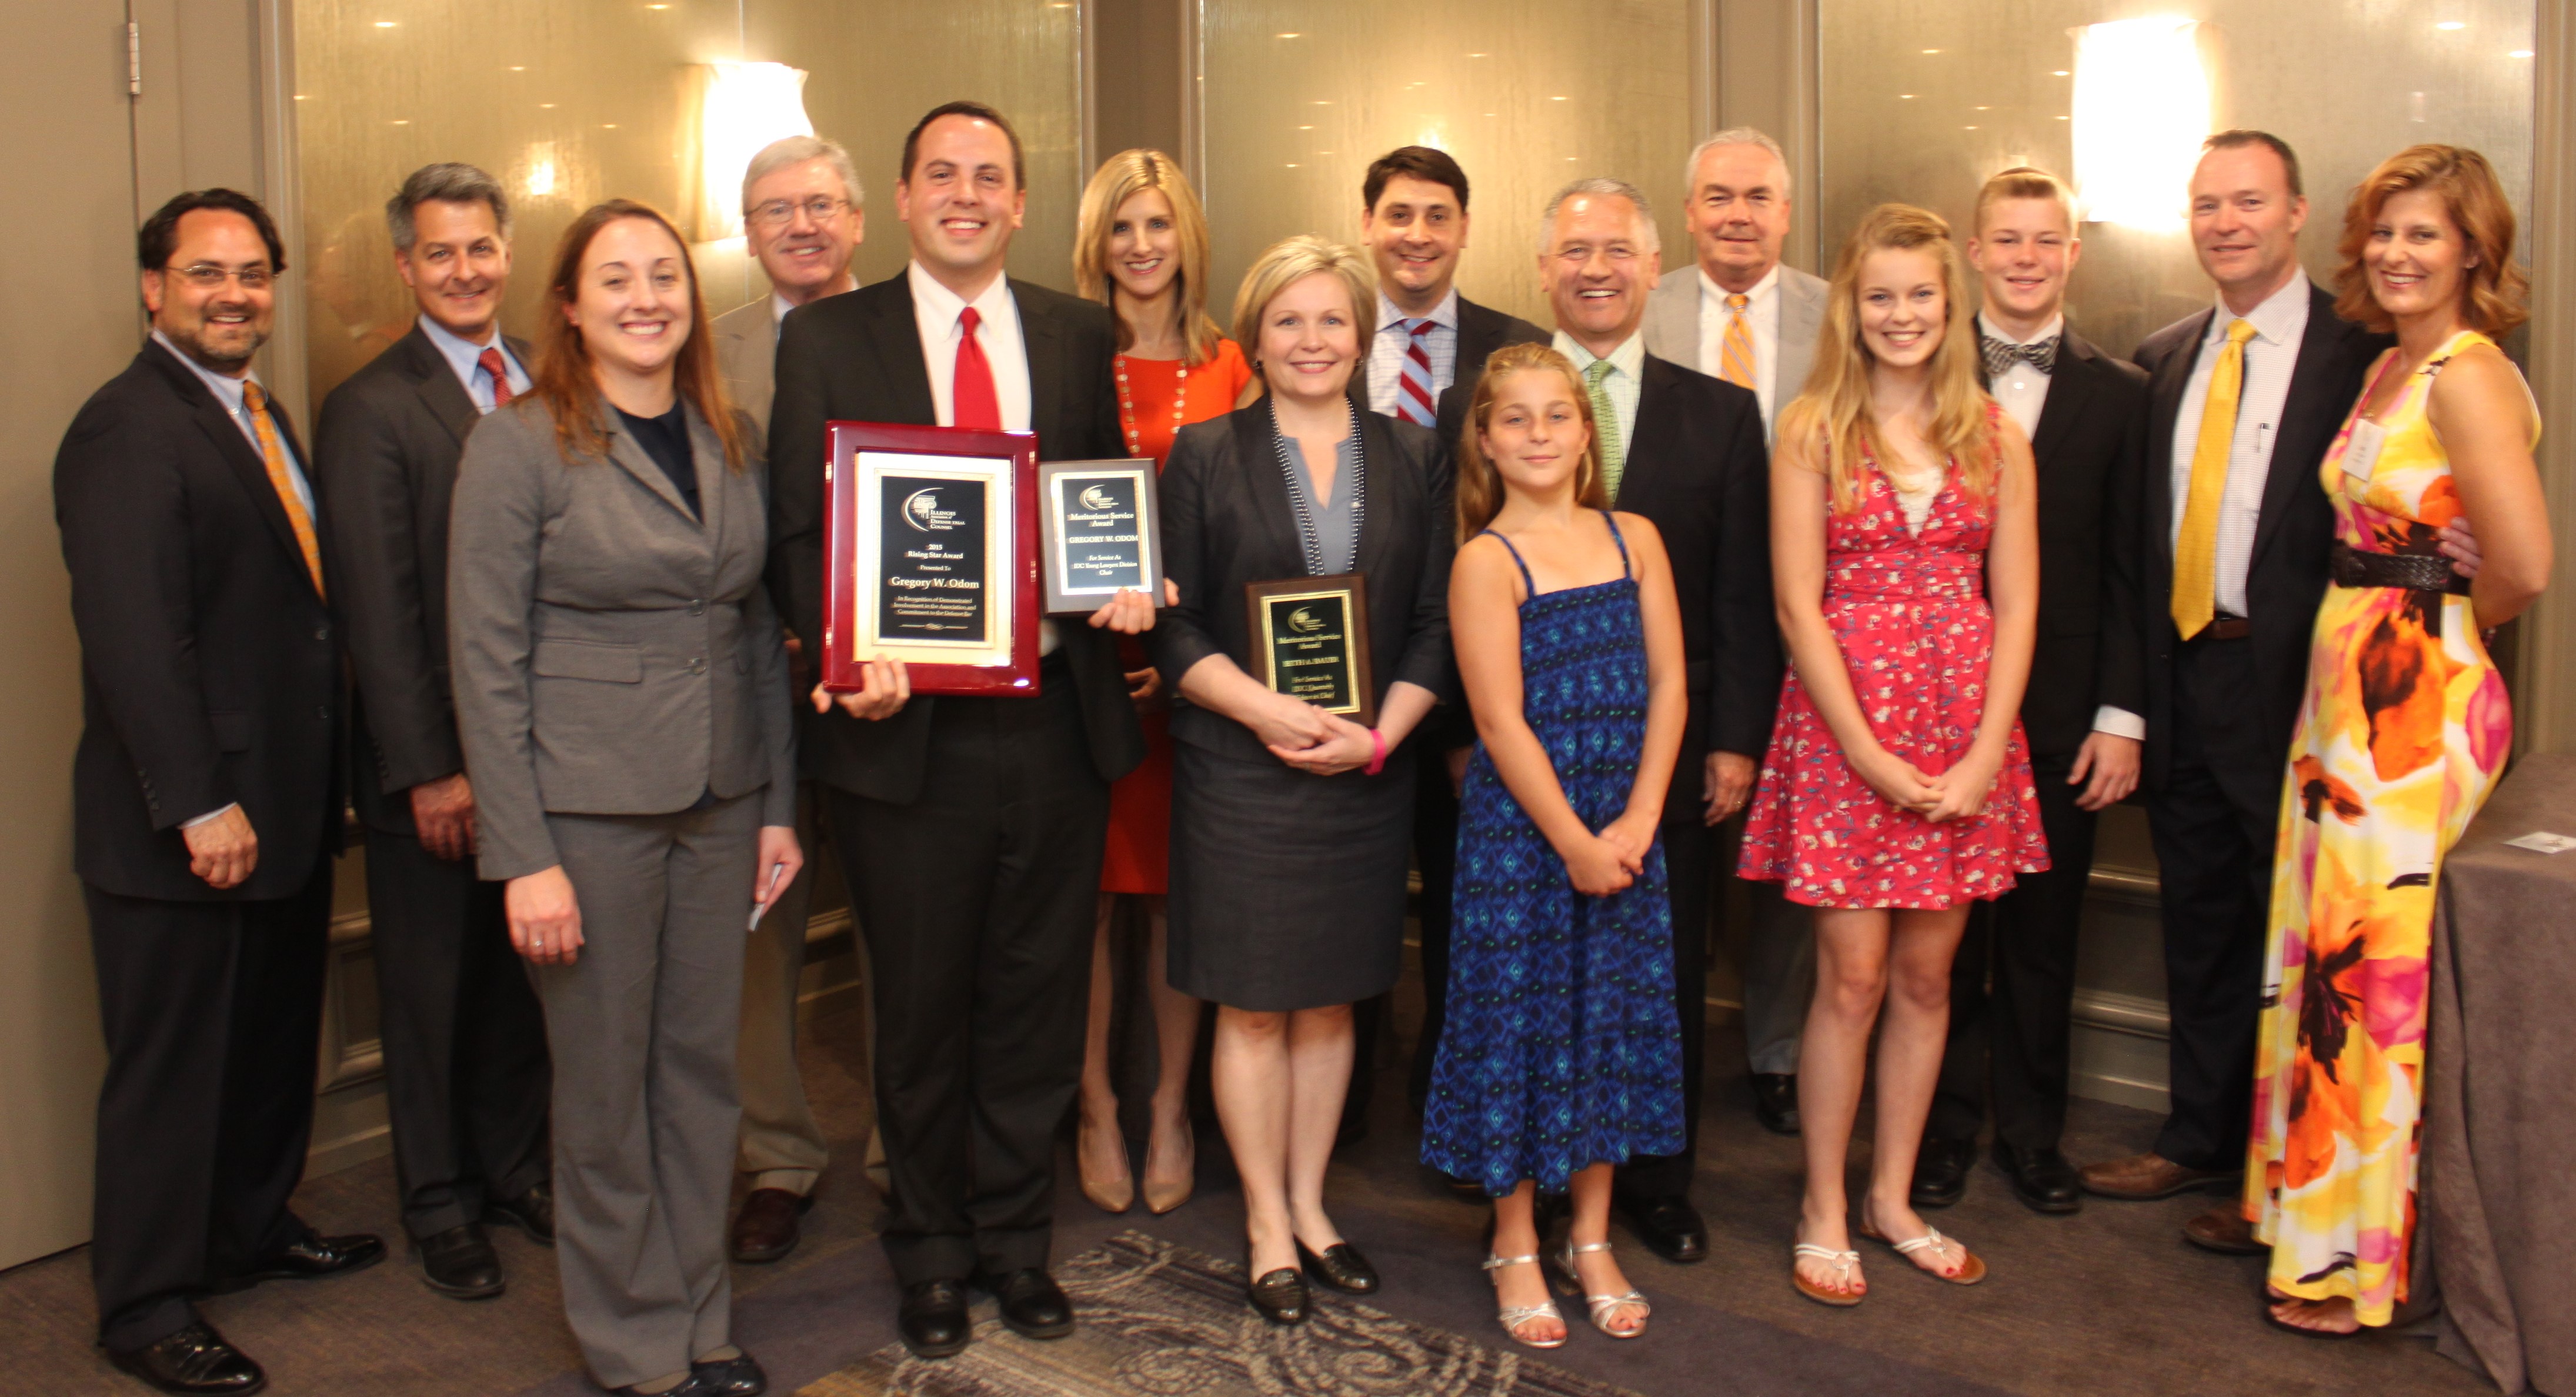 Group of 8 men (all wearing suits), 4 women (1 wearing a pantsuit and 3 wearing a dress), 2 female children (both wearing dresses), and one male child (wearing a tuxedo) standing in front of a ballroom wall. In the front row, HeplerBroom attorney Greg Odom is holding 2 award plaques, and to his left, HeplerBroom attorney Beth Bauer is holding 1 award plaque.